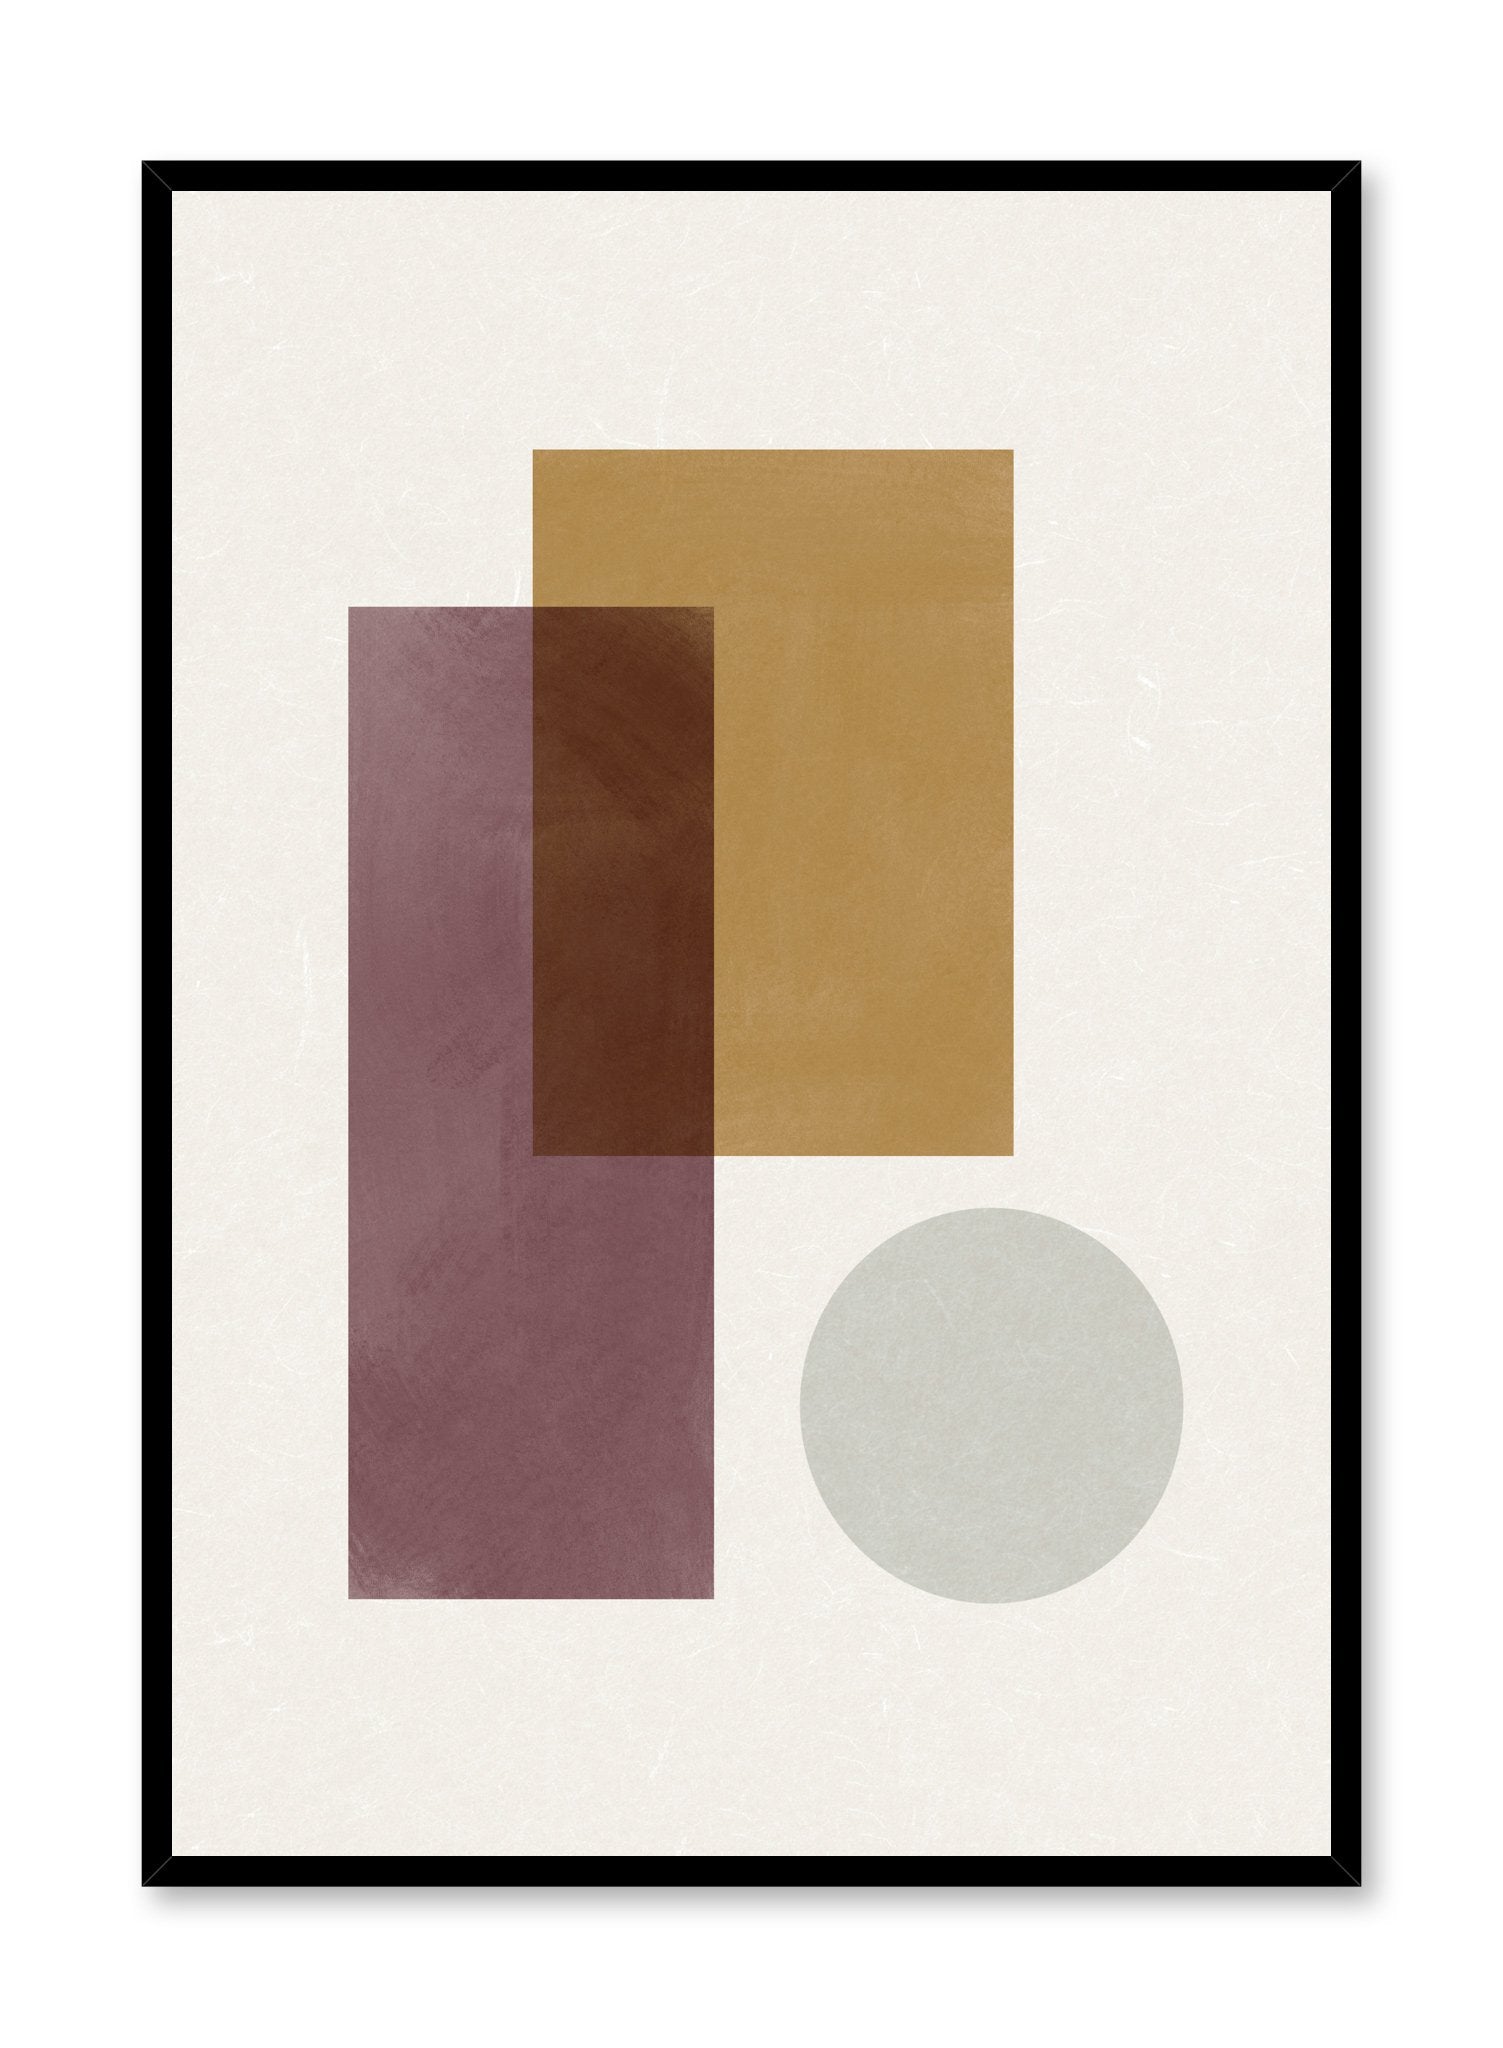 Modern abstract illustration poster by Opposite Wall with overlapping shapes by Toffie Affichiste